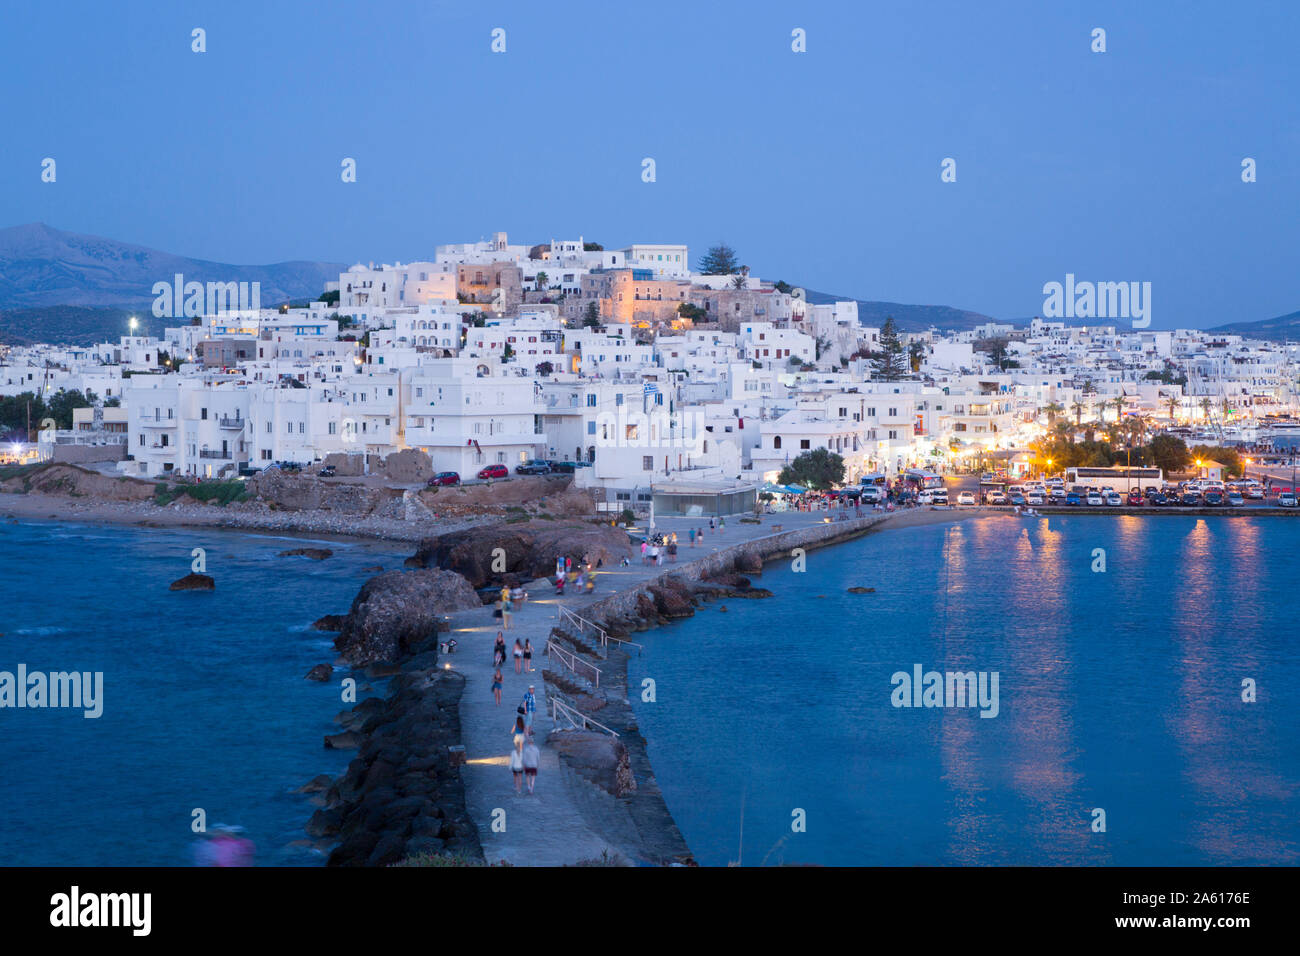 Greek Causeway High Resolution Stock Photography and Images - Alamy